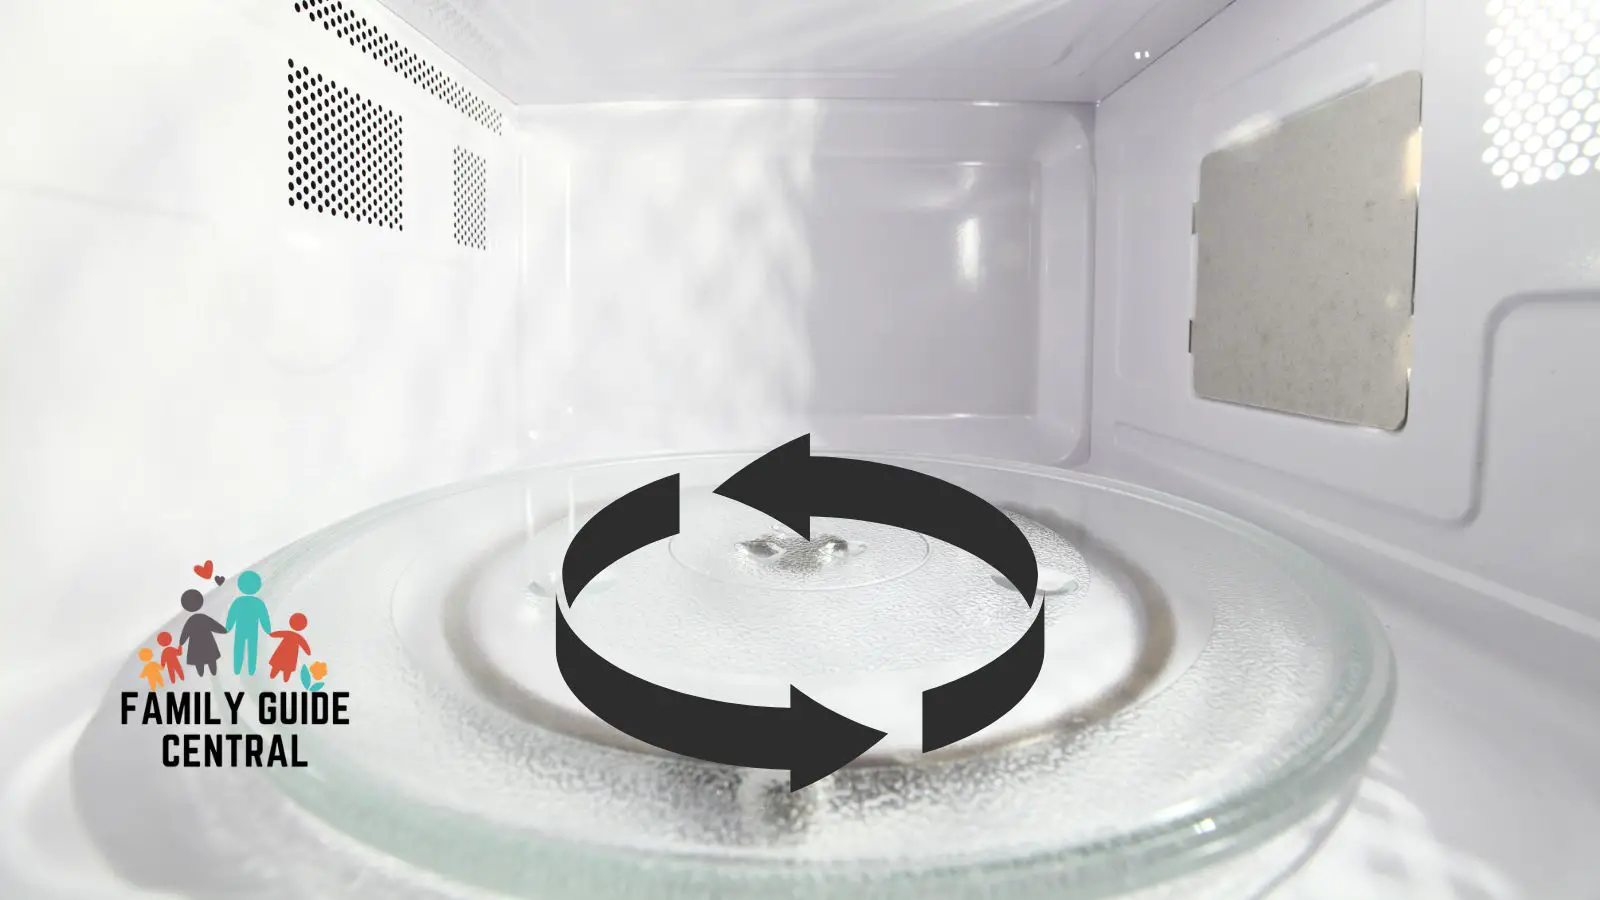 Microwave turntable spinning - familyguidecentral.com